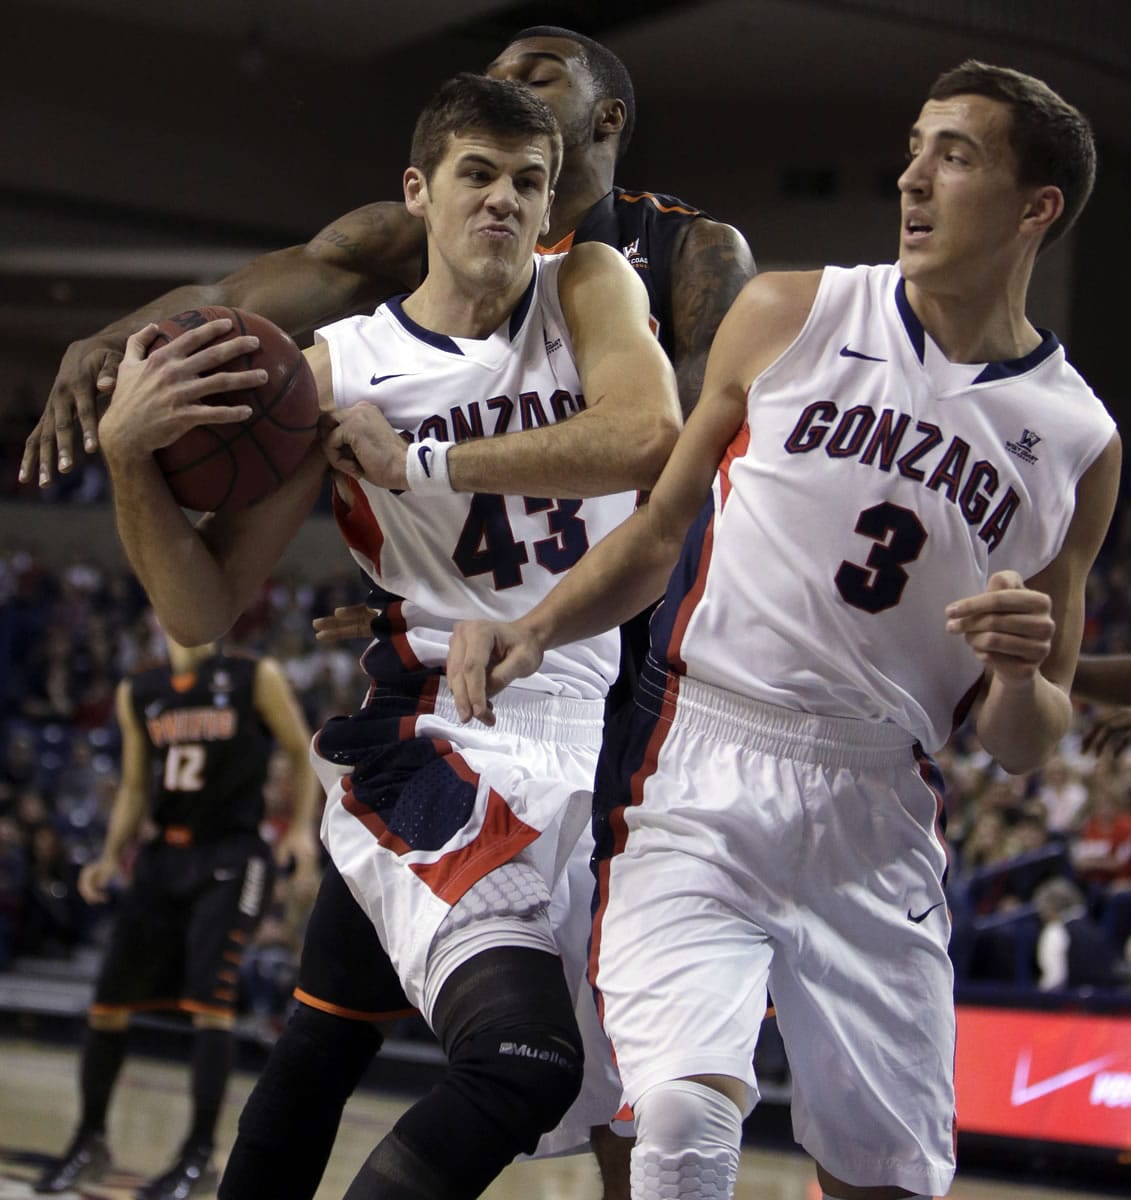 Gonzaga's Drew Barham (43) and Kyle Dranginis (3) fight for a rebound against Pacific's Khalil Kelley during the first half Saturday, Jan. 4, 2014, in Spokane, Wash.